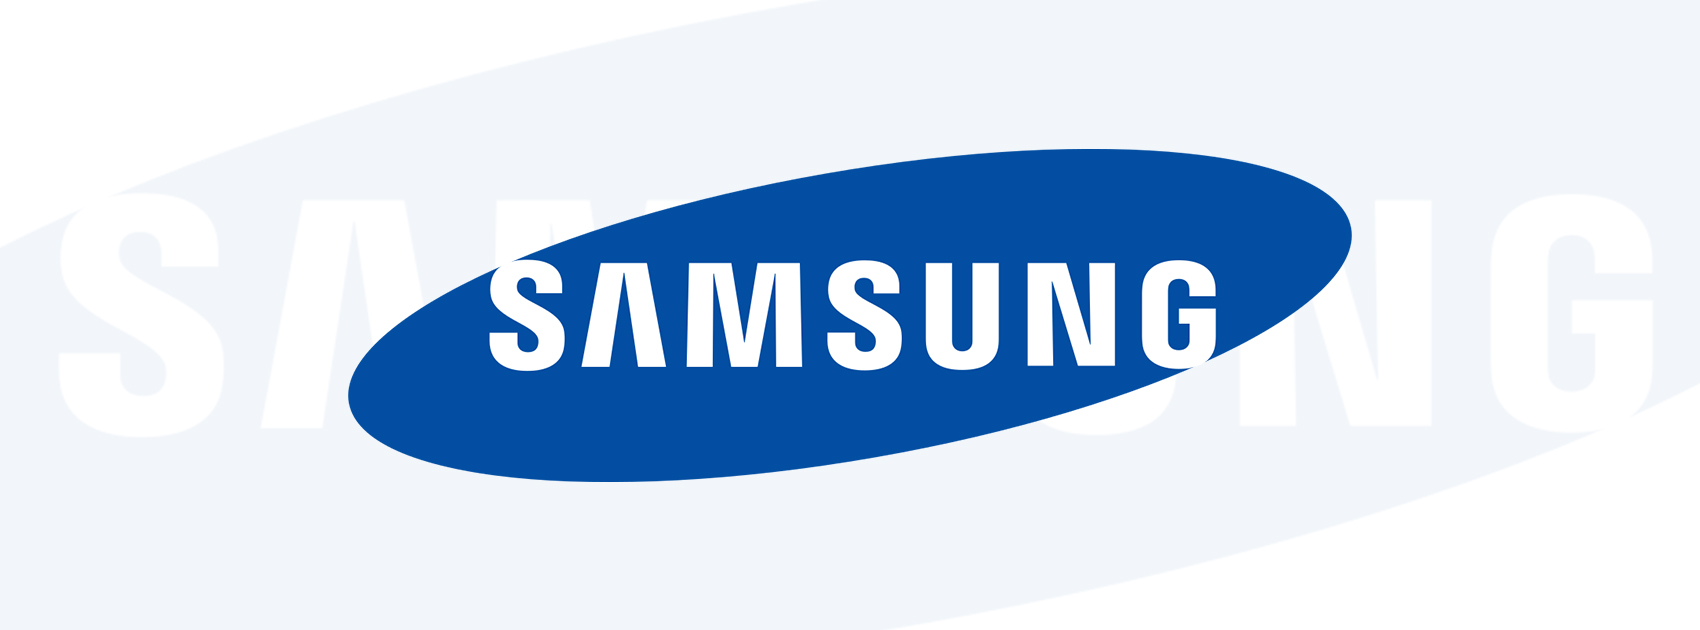 Samsung Lesser Known Facts,Inspiring Facts about Samsung, Interesting Facts 2019, Most Interesting Facts, Samsung Amazing Facts, Samsung Facts, Samsung Facts 2019, Samsung History and Facts, Samsung Latest News, Samsung Success Story, Samsung Unknown Facts, startup stories, Surprising Facts About Samsung